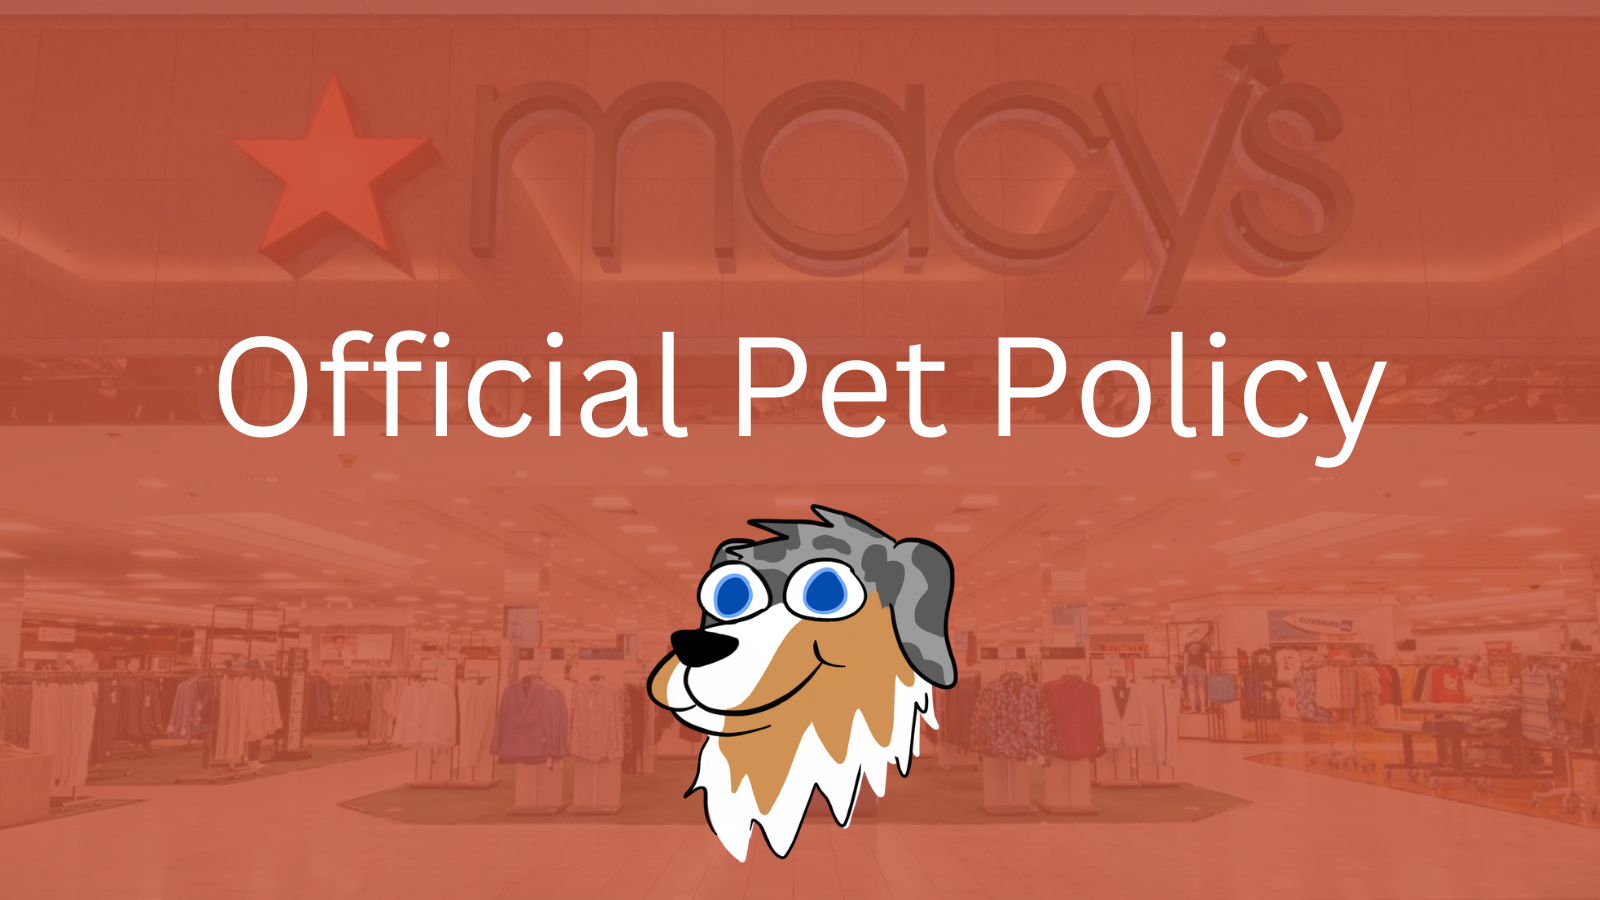 Image Text: "Official Pet Policy"